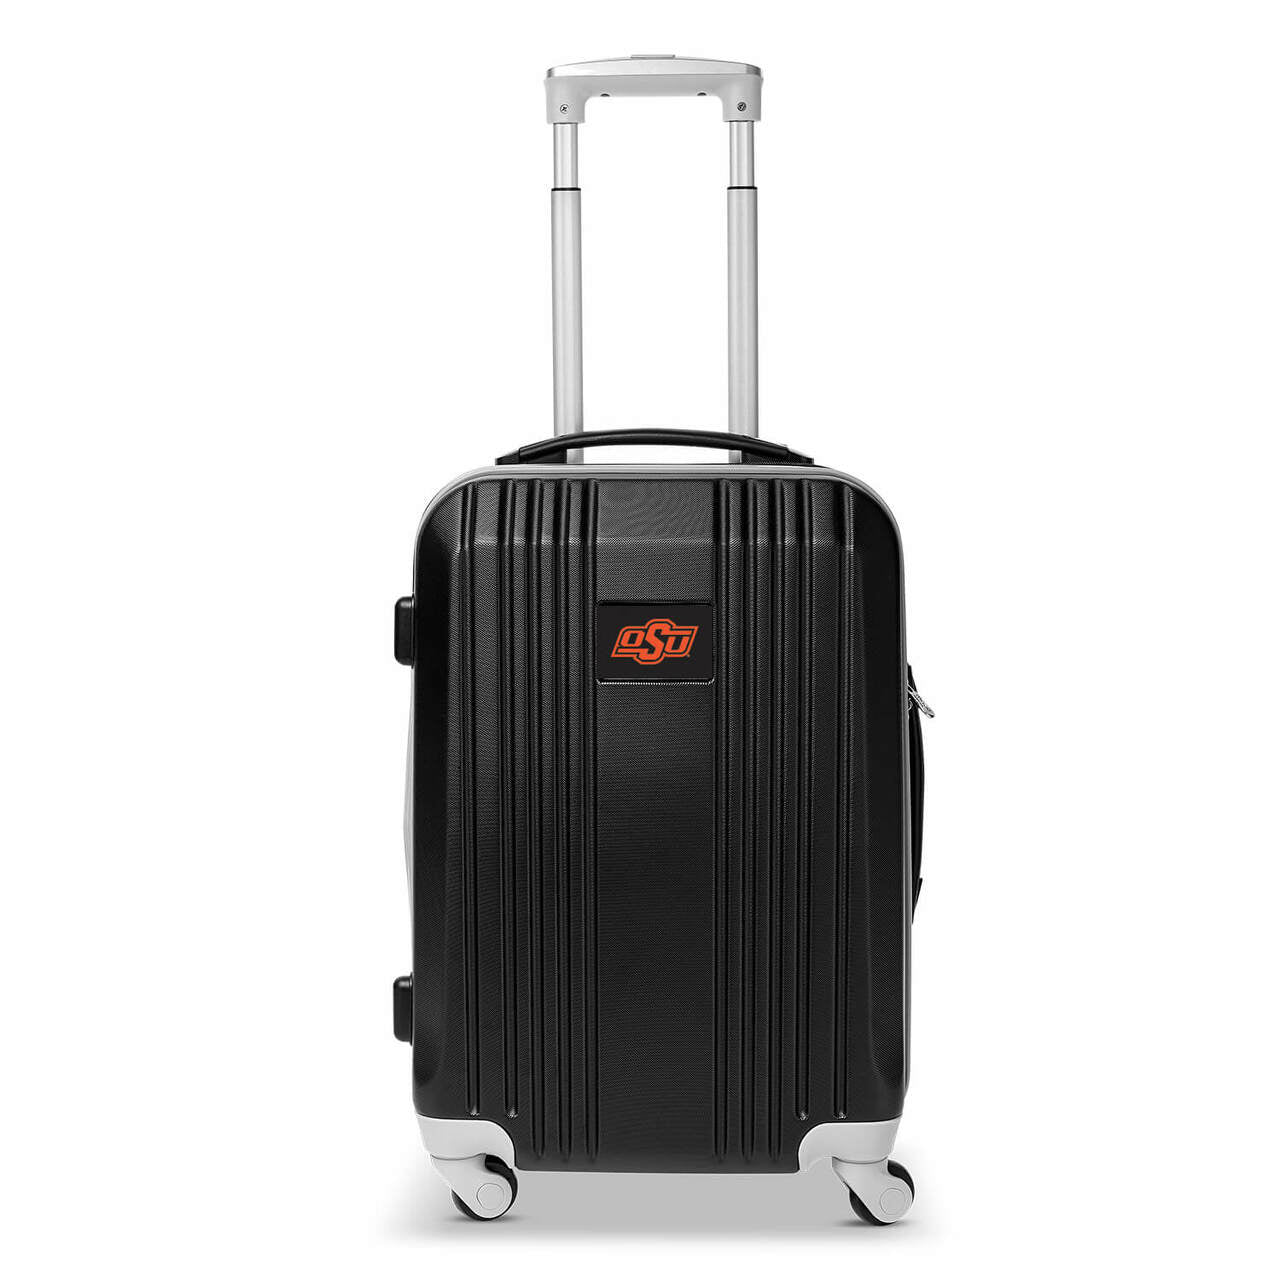 Oklahoma State Carry On Spinner Luggage | Oklahoma State Hardcase Two-Tone Luggage Carry-on Spinner in Black